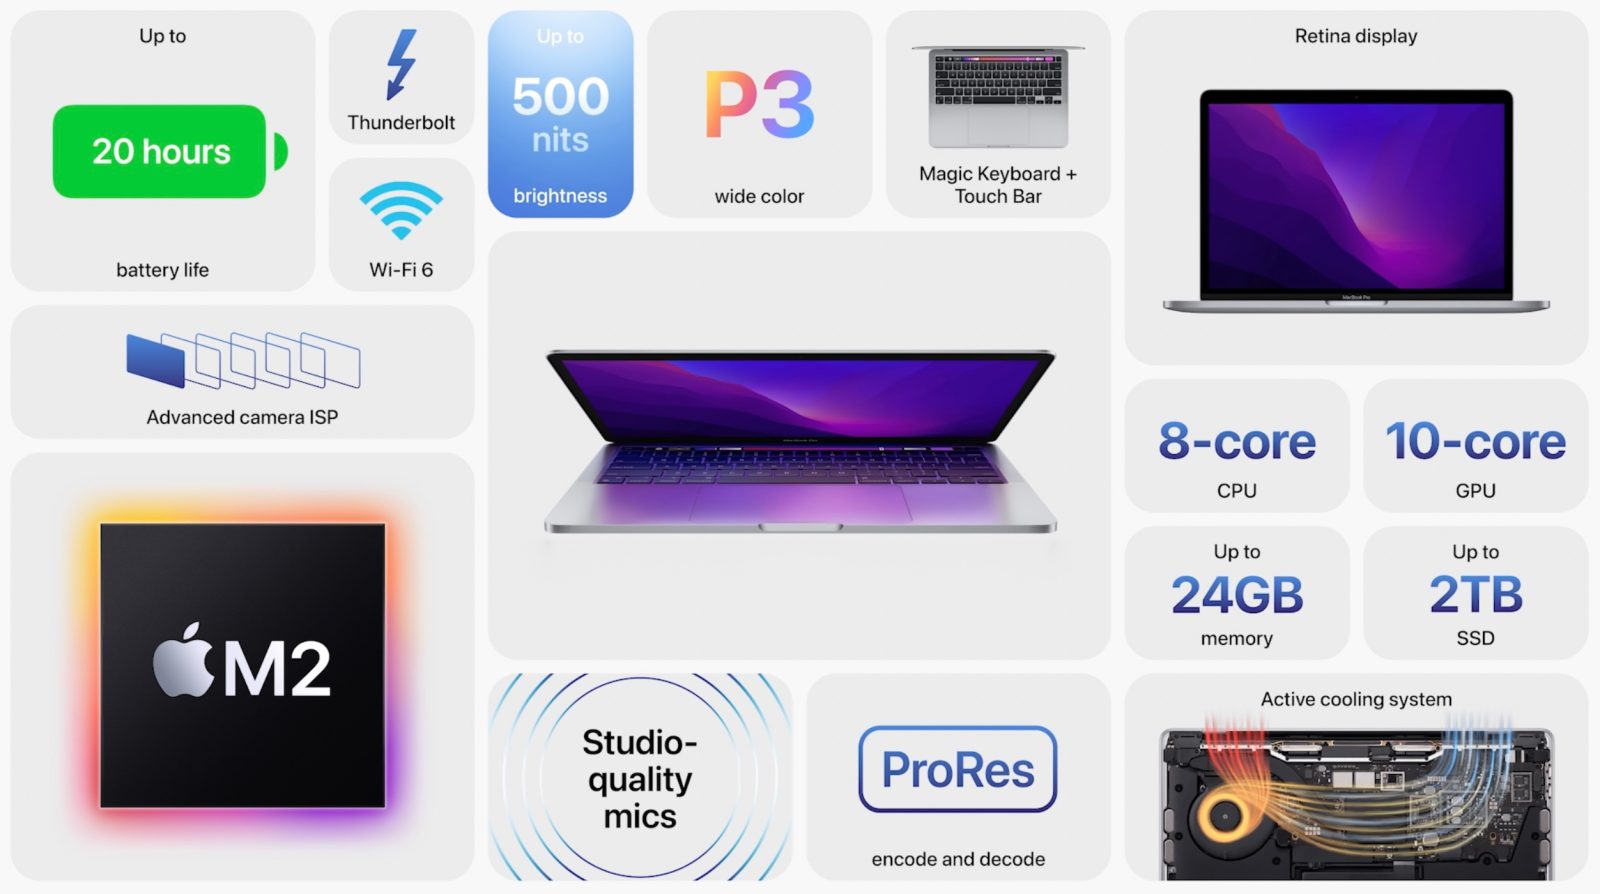 Entry-level MacBook Pro announced with M2 chip, Touch Bar, Thunderbolt ports - 9to5Mac